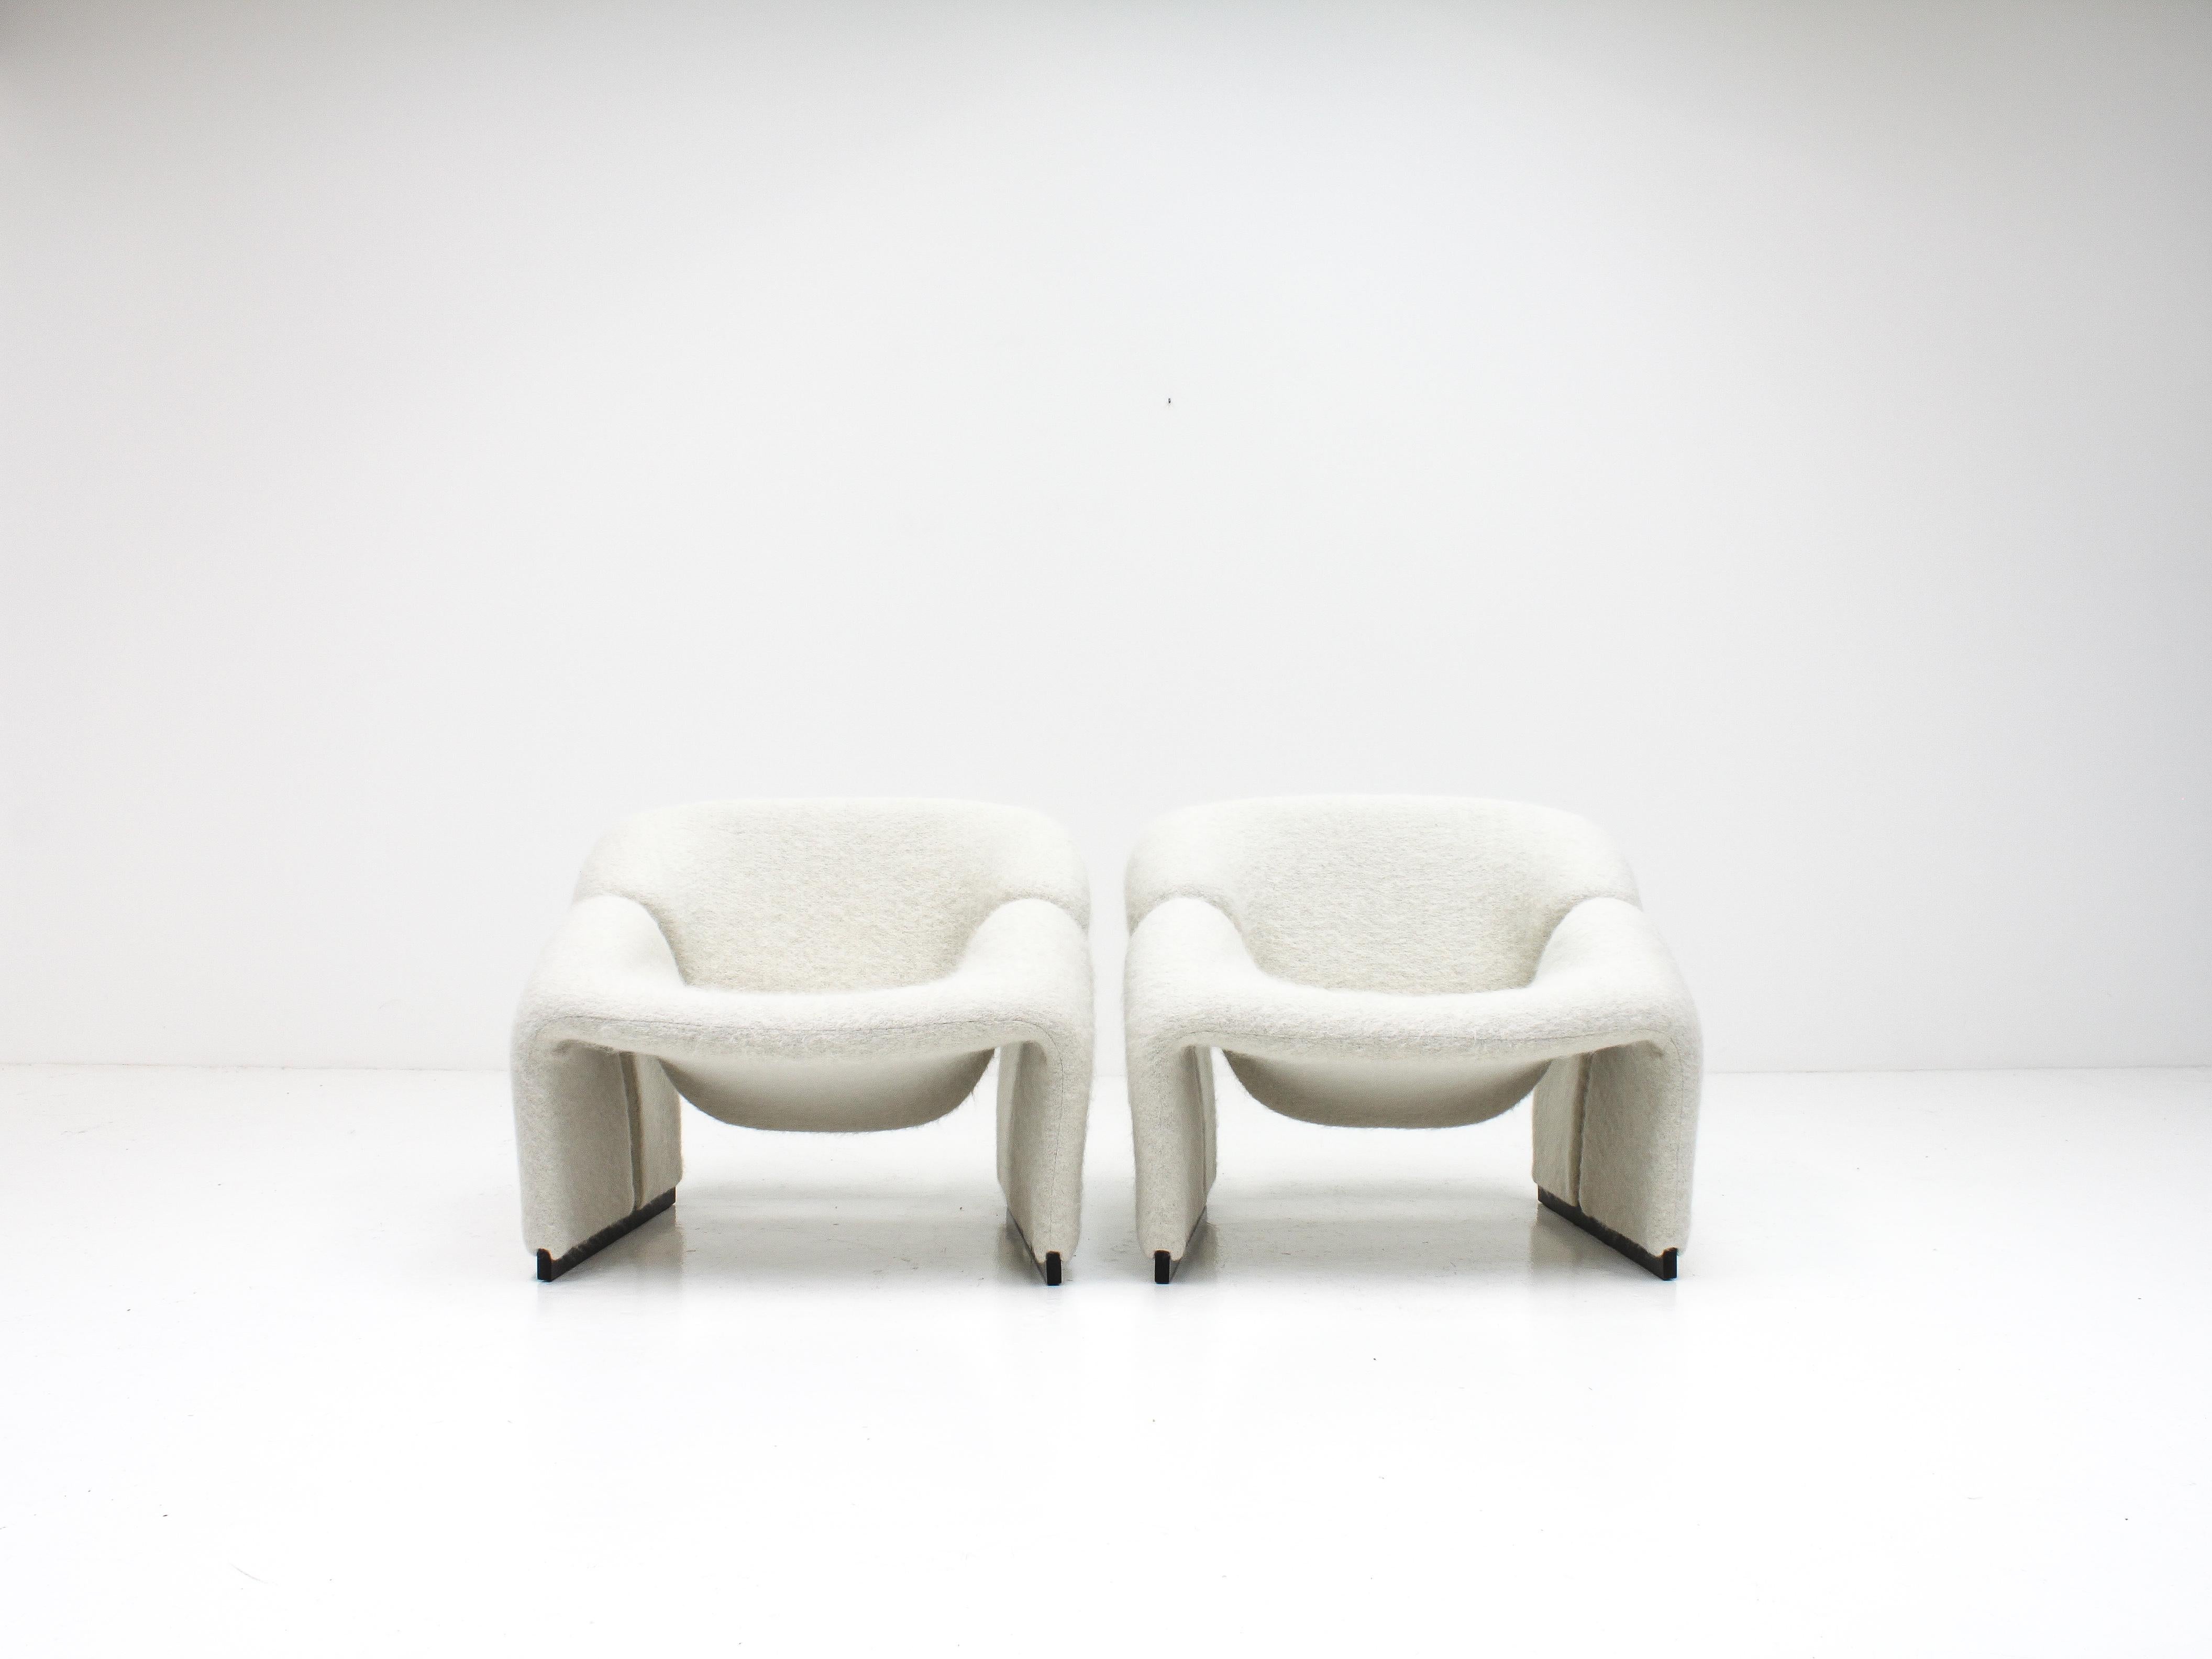 20th Century Pair of Pierre Paulin F580 1st Edition Groovy Chairs in Pierre Frey for Artifort